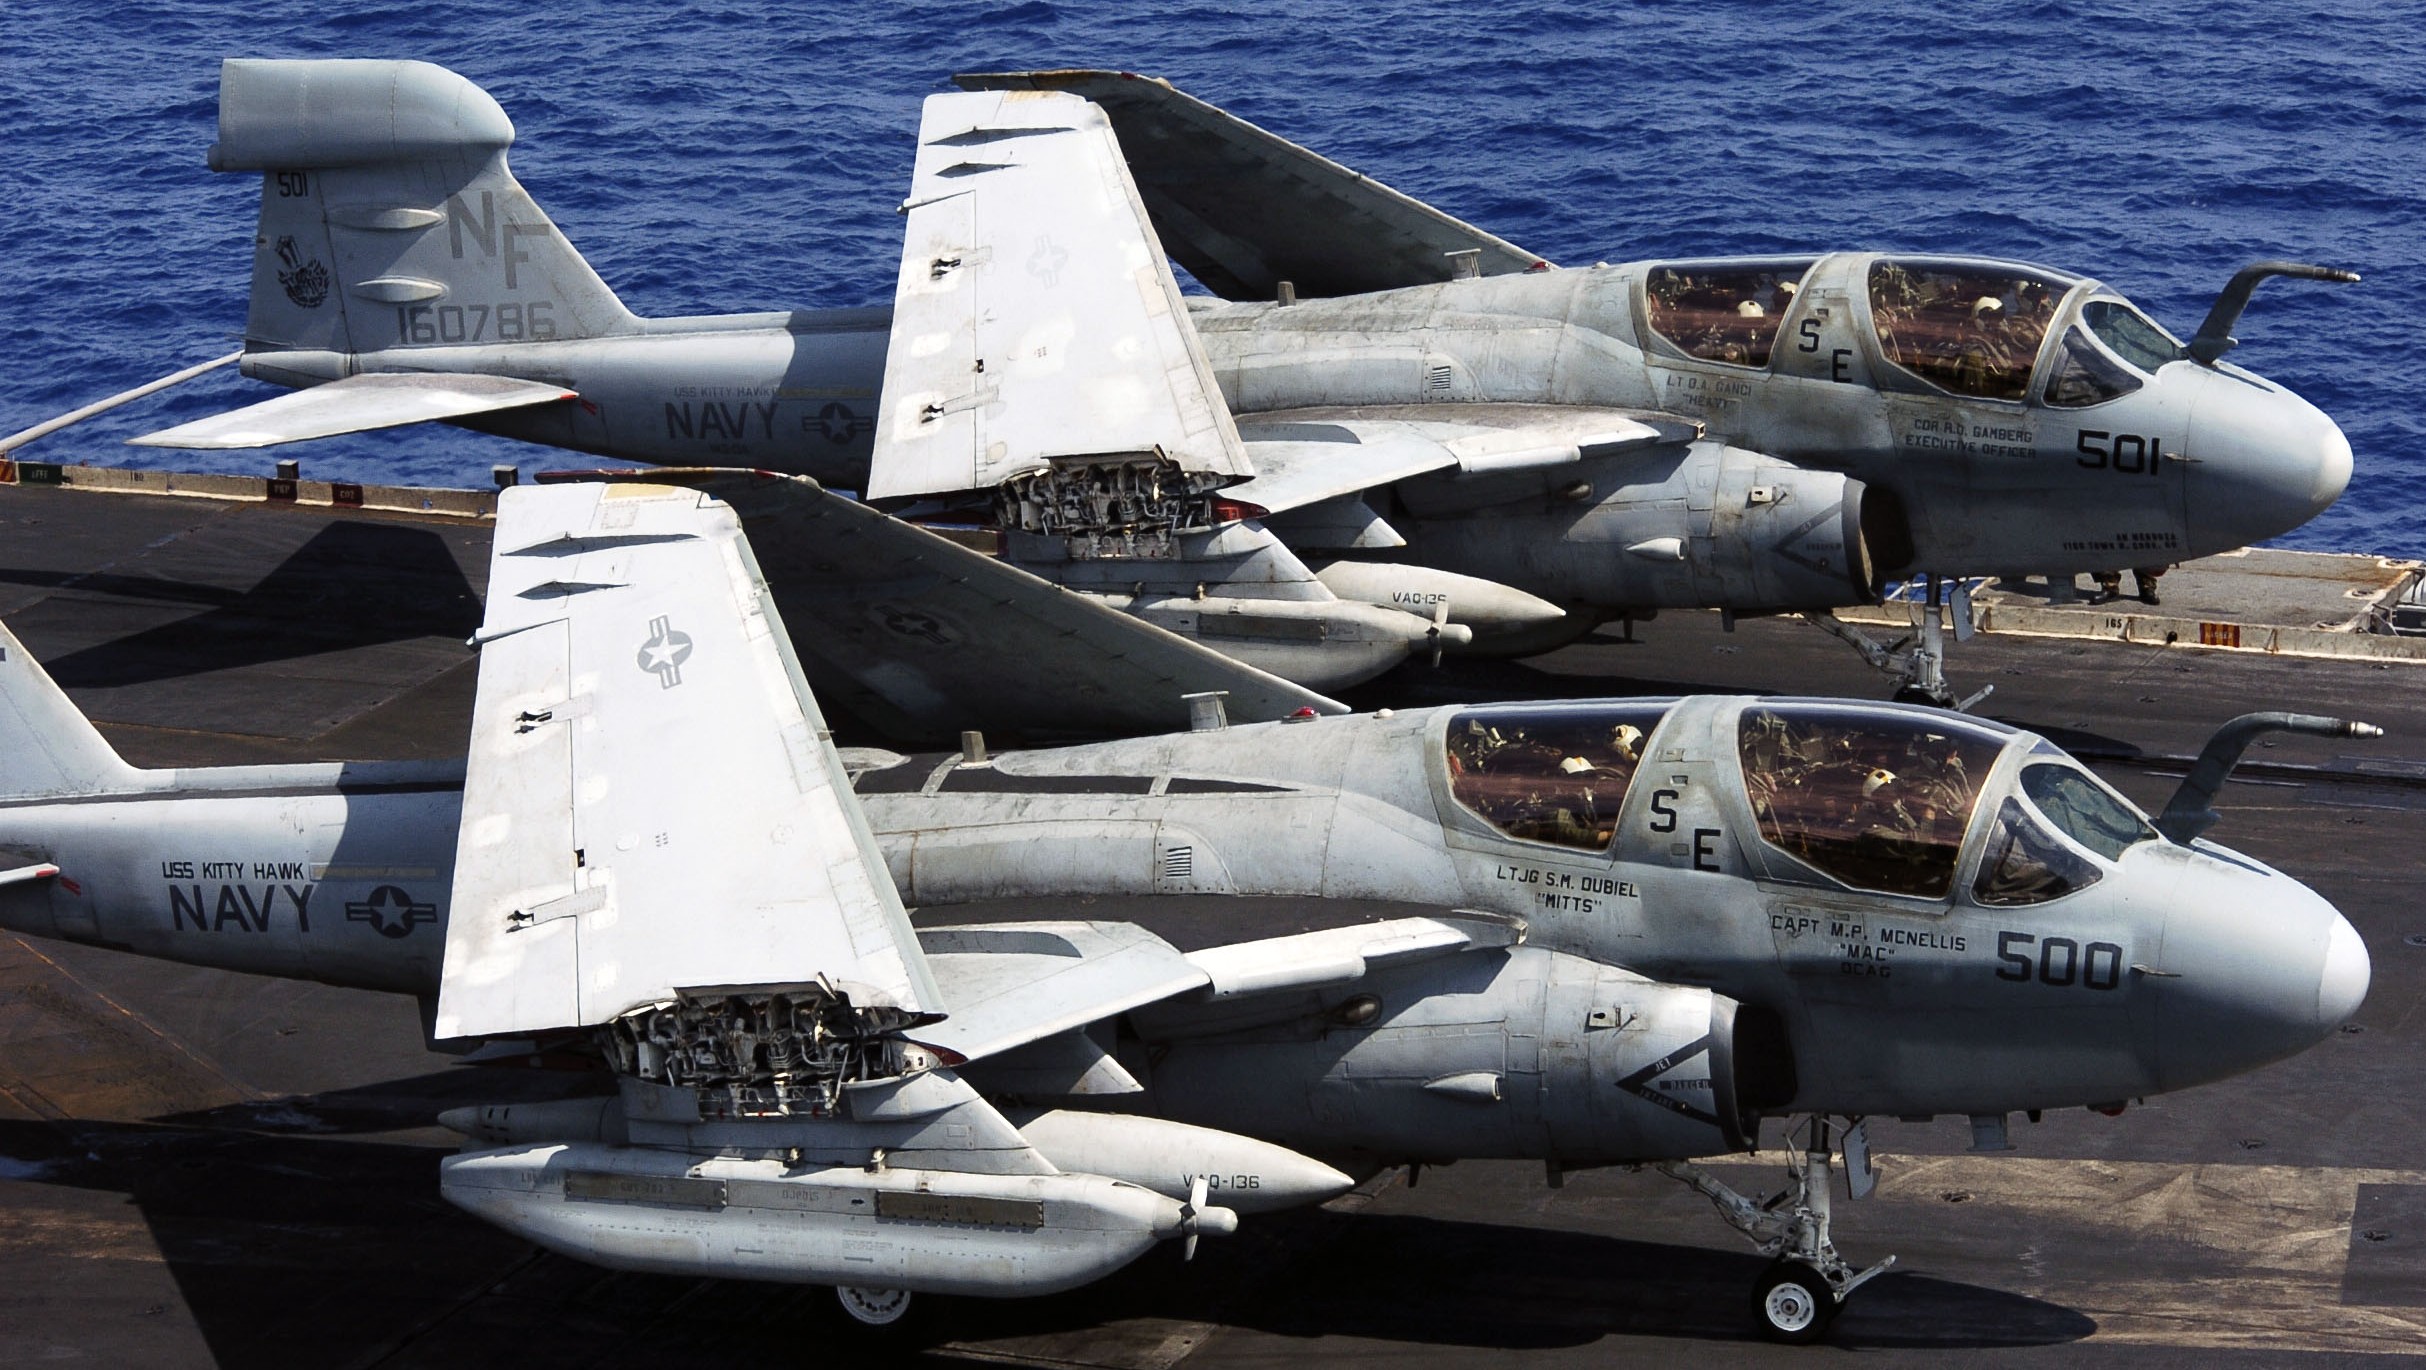 vaq-136 gauntlets electronic attack squadron vaqron us navy ea-6b prowler carrier air wing cvw-5 uss kitty hawk cv-63 12